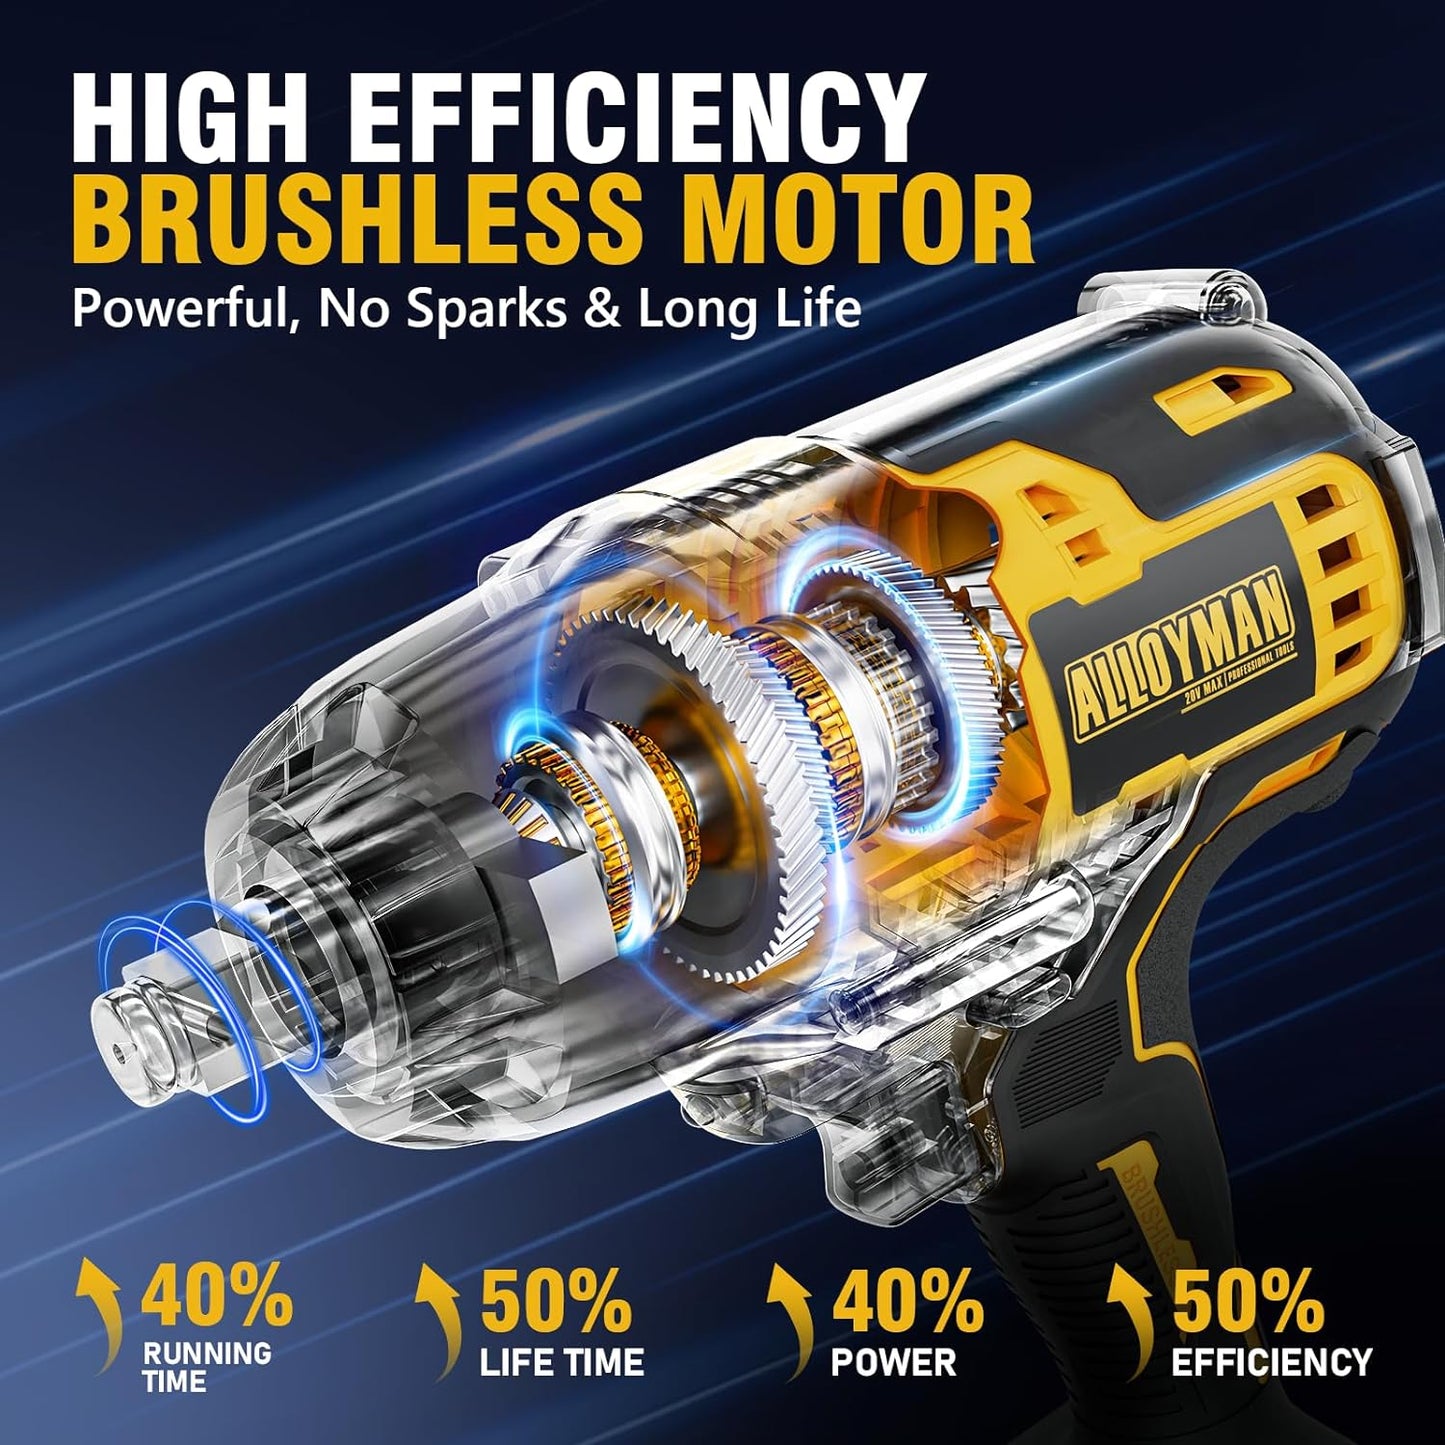 1/2 Inch Impact Wrench Cordless, Max Torque 555 Ft-Lbs Battery Impact Wrench 20V Brushless Motor 2000 RPM, with 6 Sockets, 3 Extension Bars, 4.0 AH Li-Ion Battery and 1 Hour Fast Charge